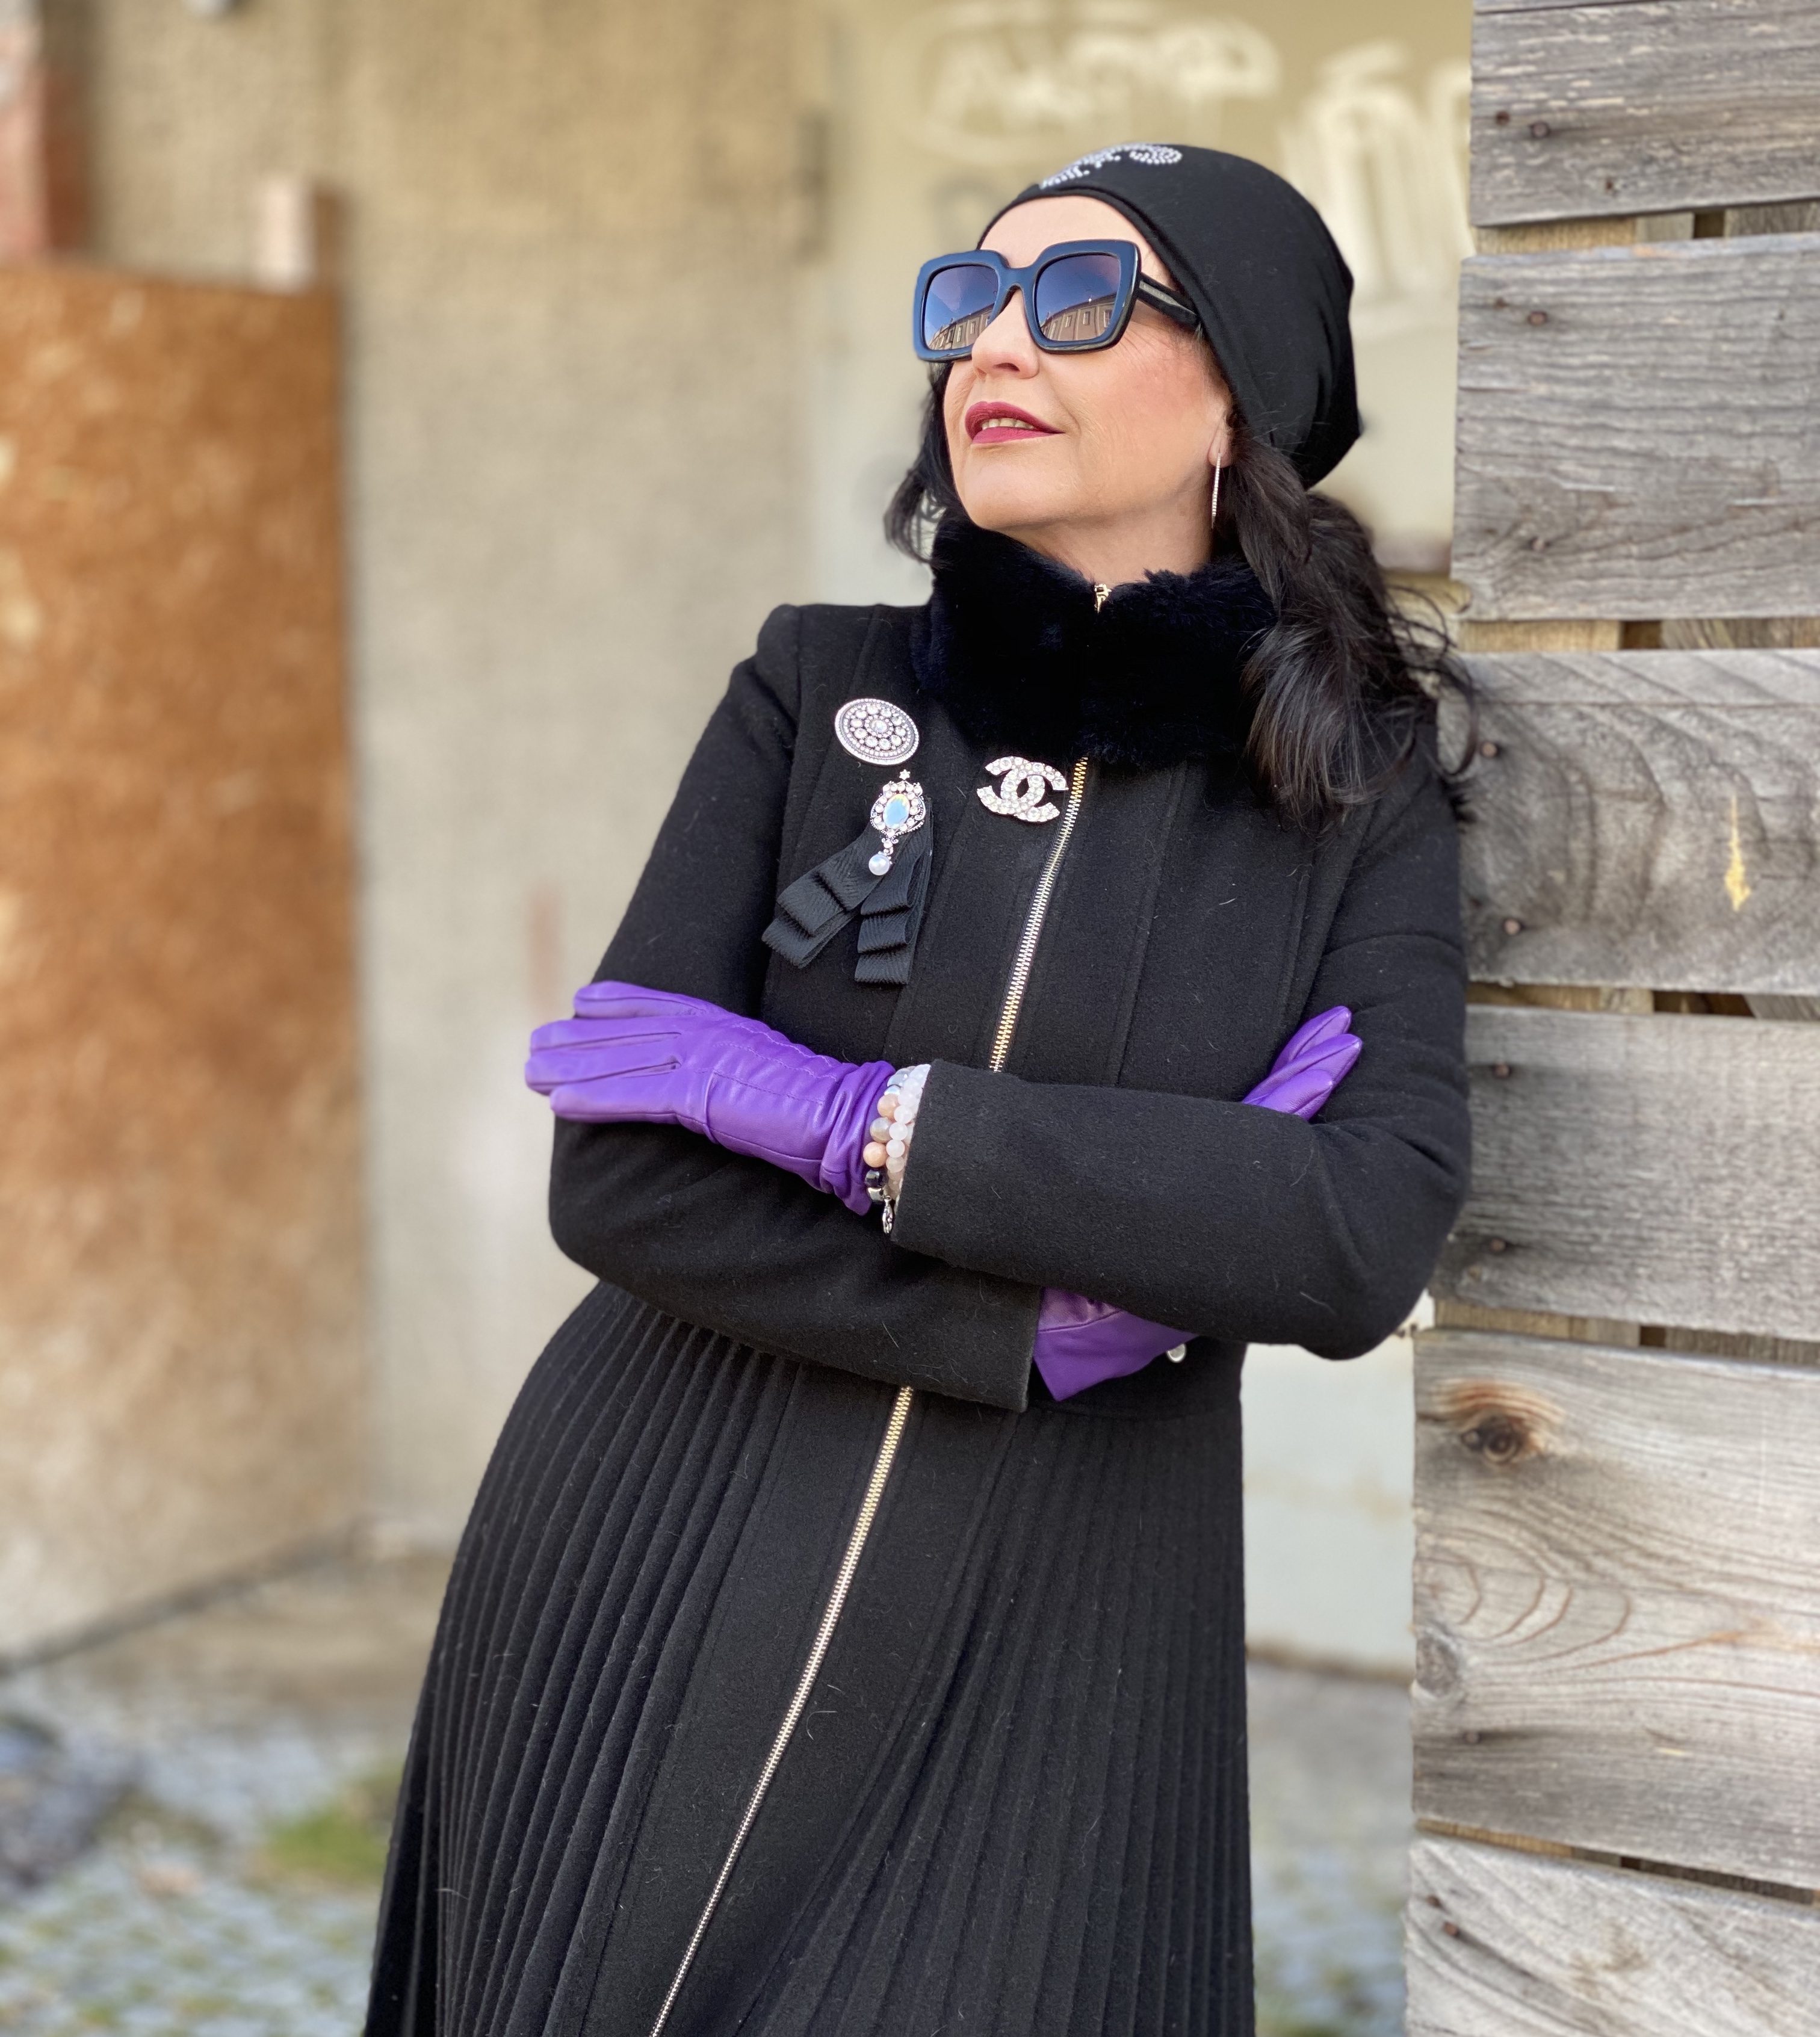 Purple Accessoires, Rinascimento coat, pleated, purple gloves, purple boots, yoox, Chanel pin, bling bling, italia moda, style for ladies, Fashionblog Augsburg, streetstyle, streetfashion, streetwear, winteroutfit, Burberry shades, cochastyle